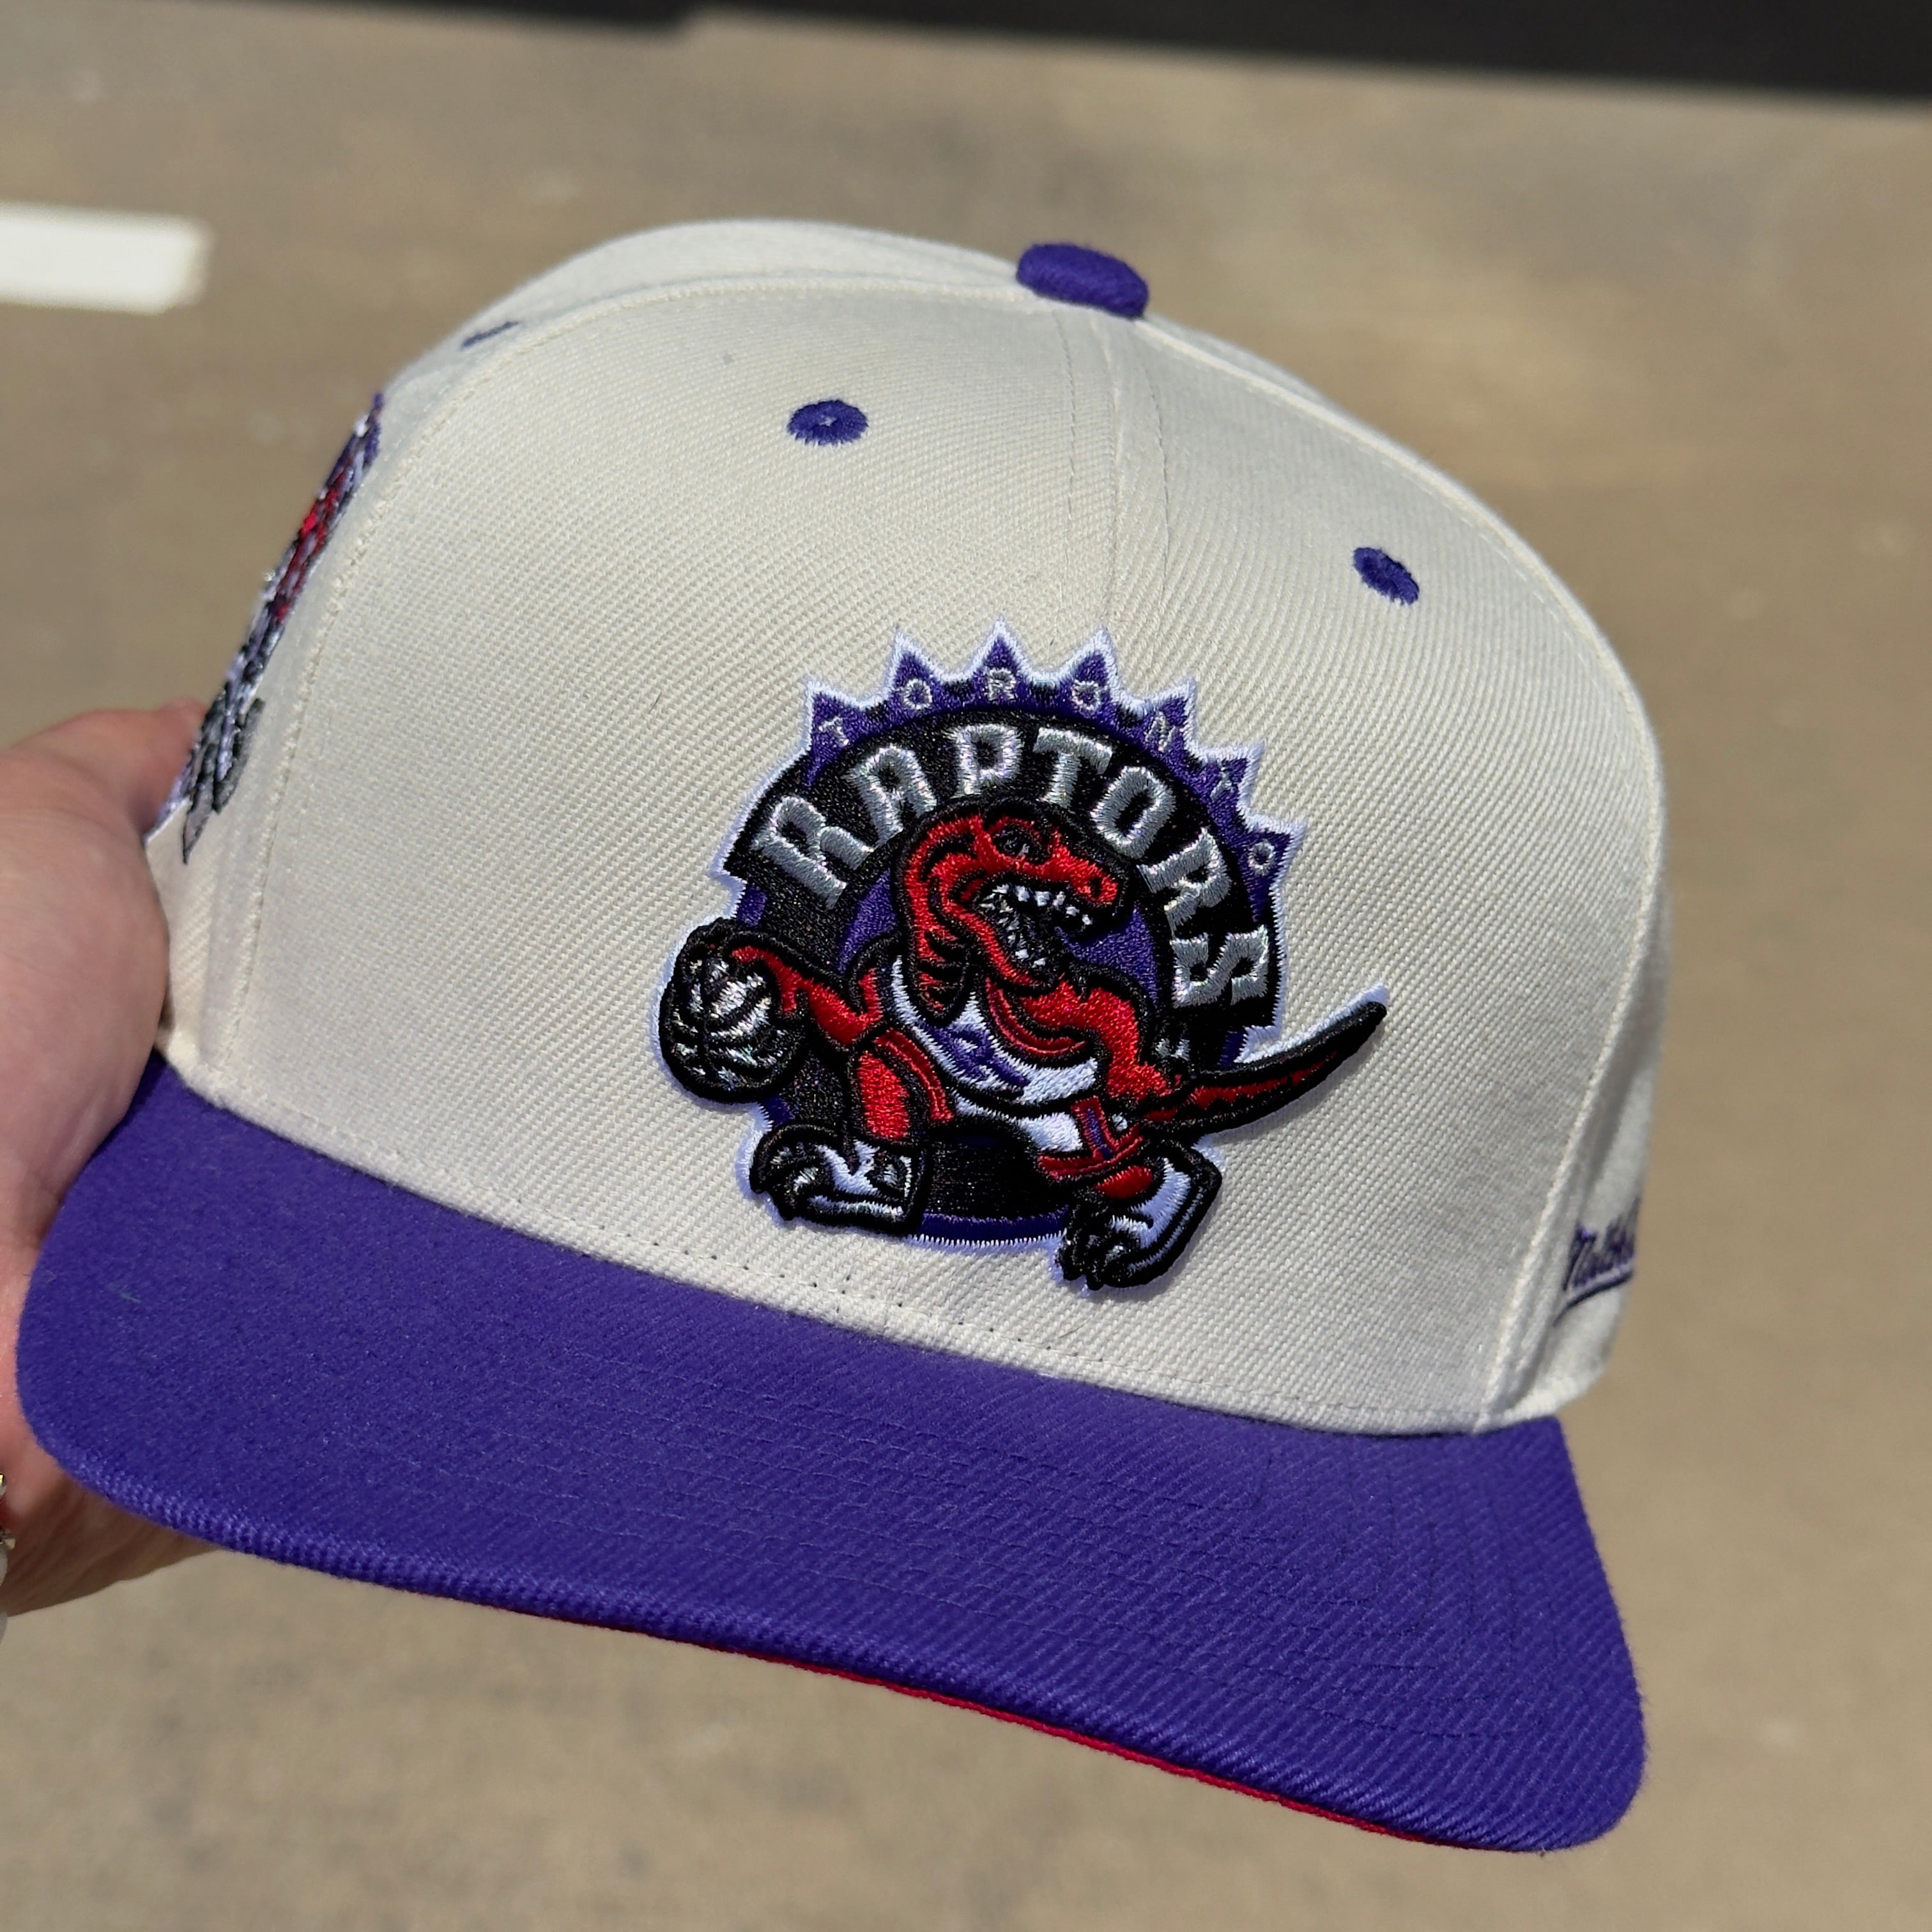 USED 3/8 Stone Mitchell and Ness Toronto Raptors Inaugural Season Nostalgia Fitted Hat